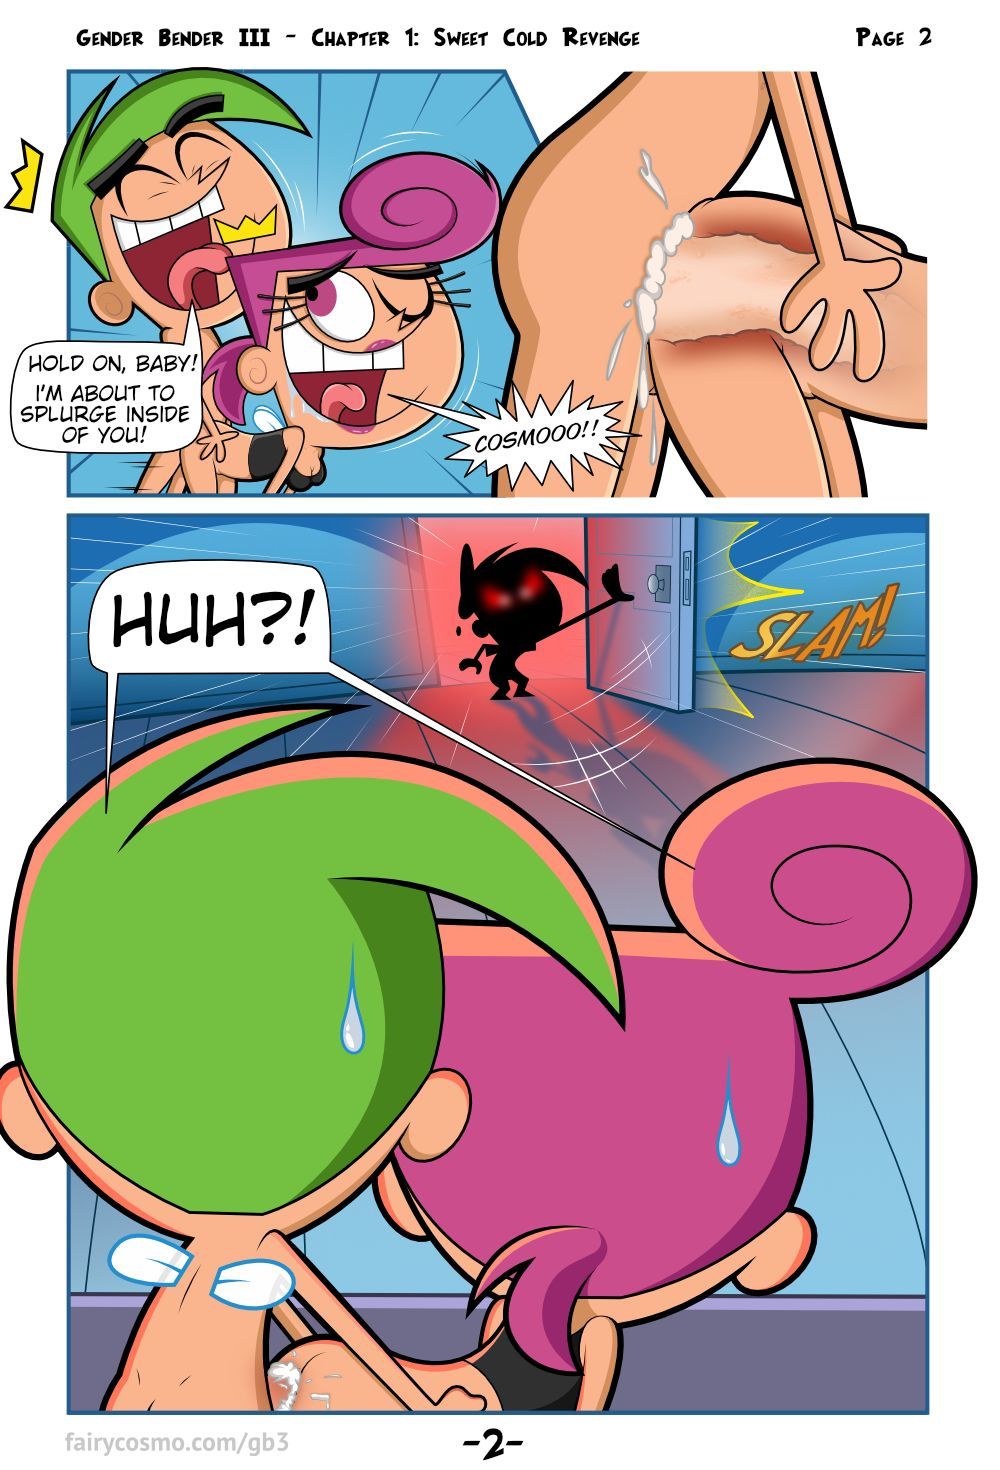 Fairly OddParents - Gender Bender III (Fairycosmo) page 3